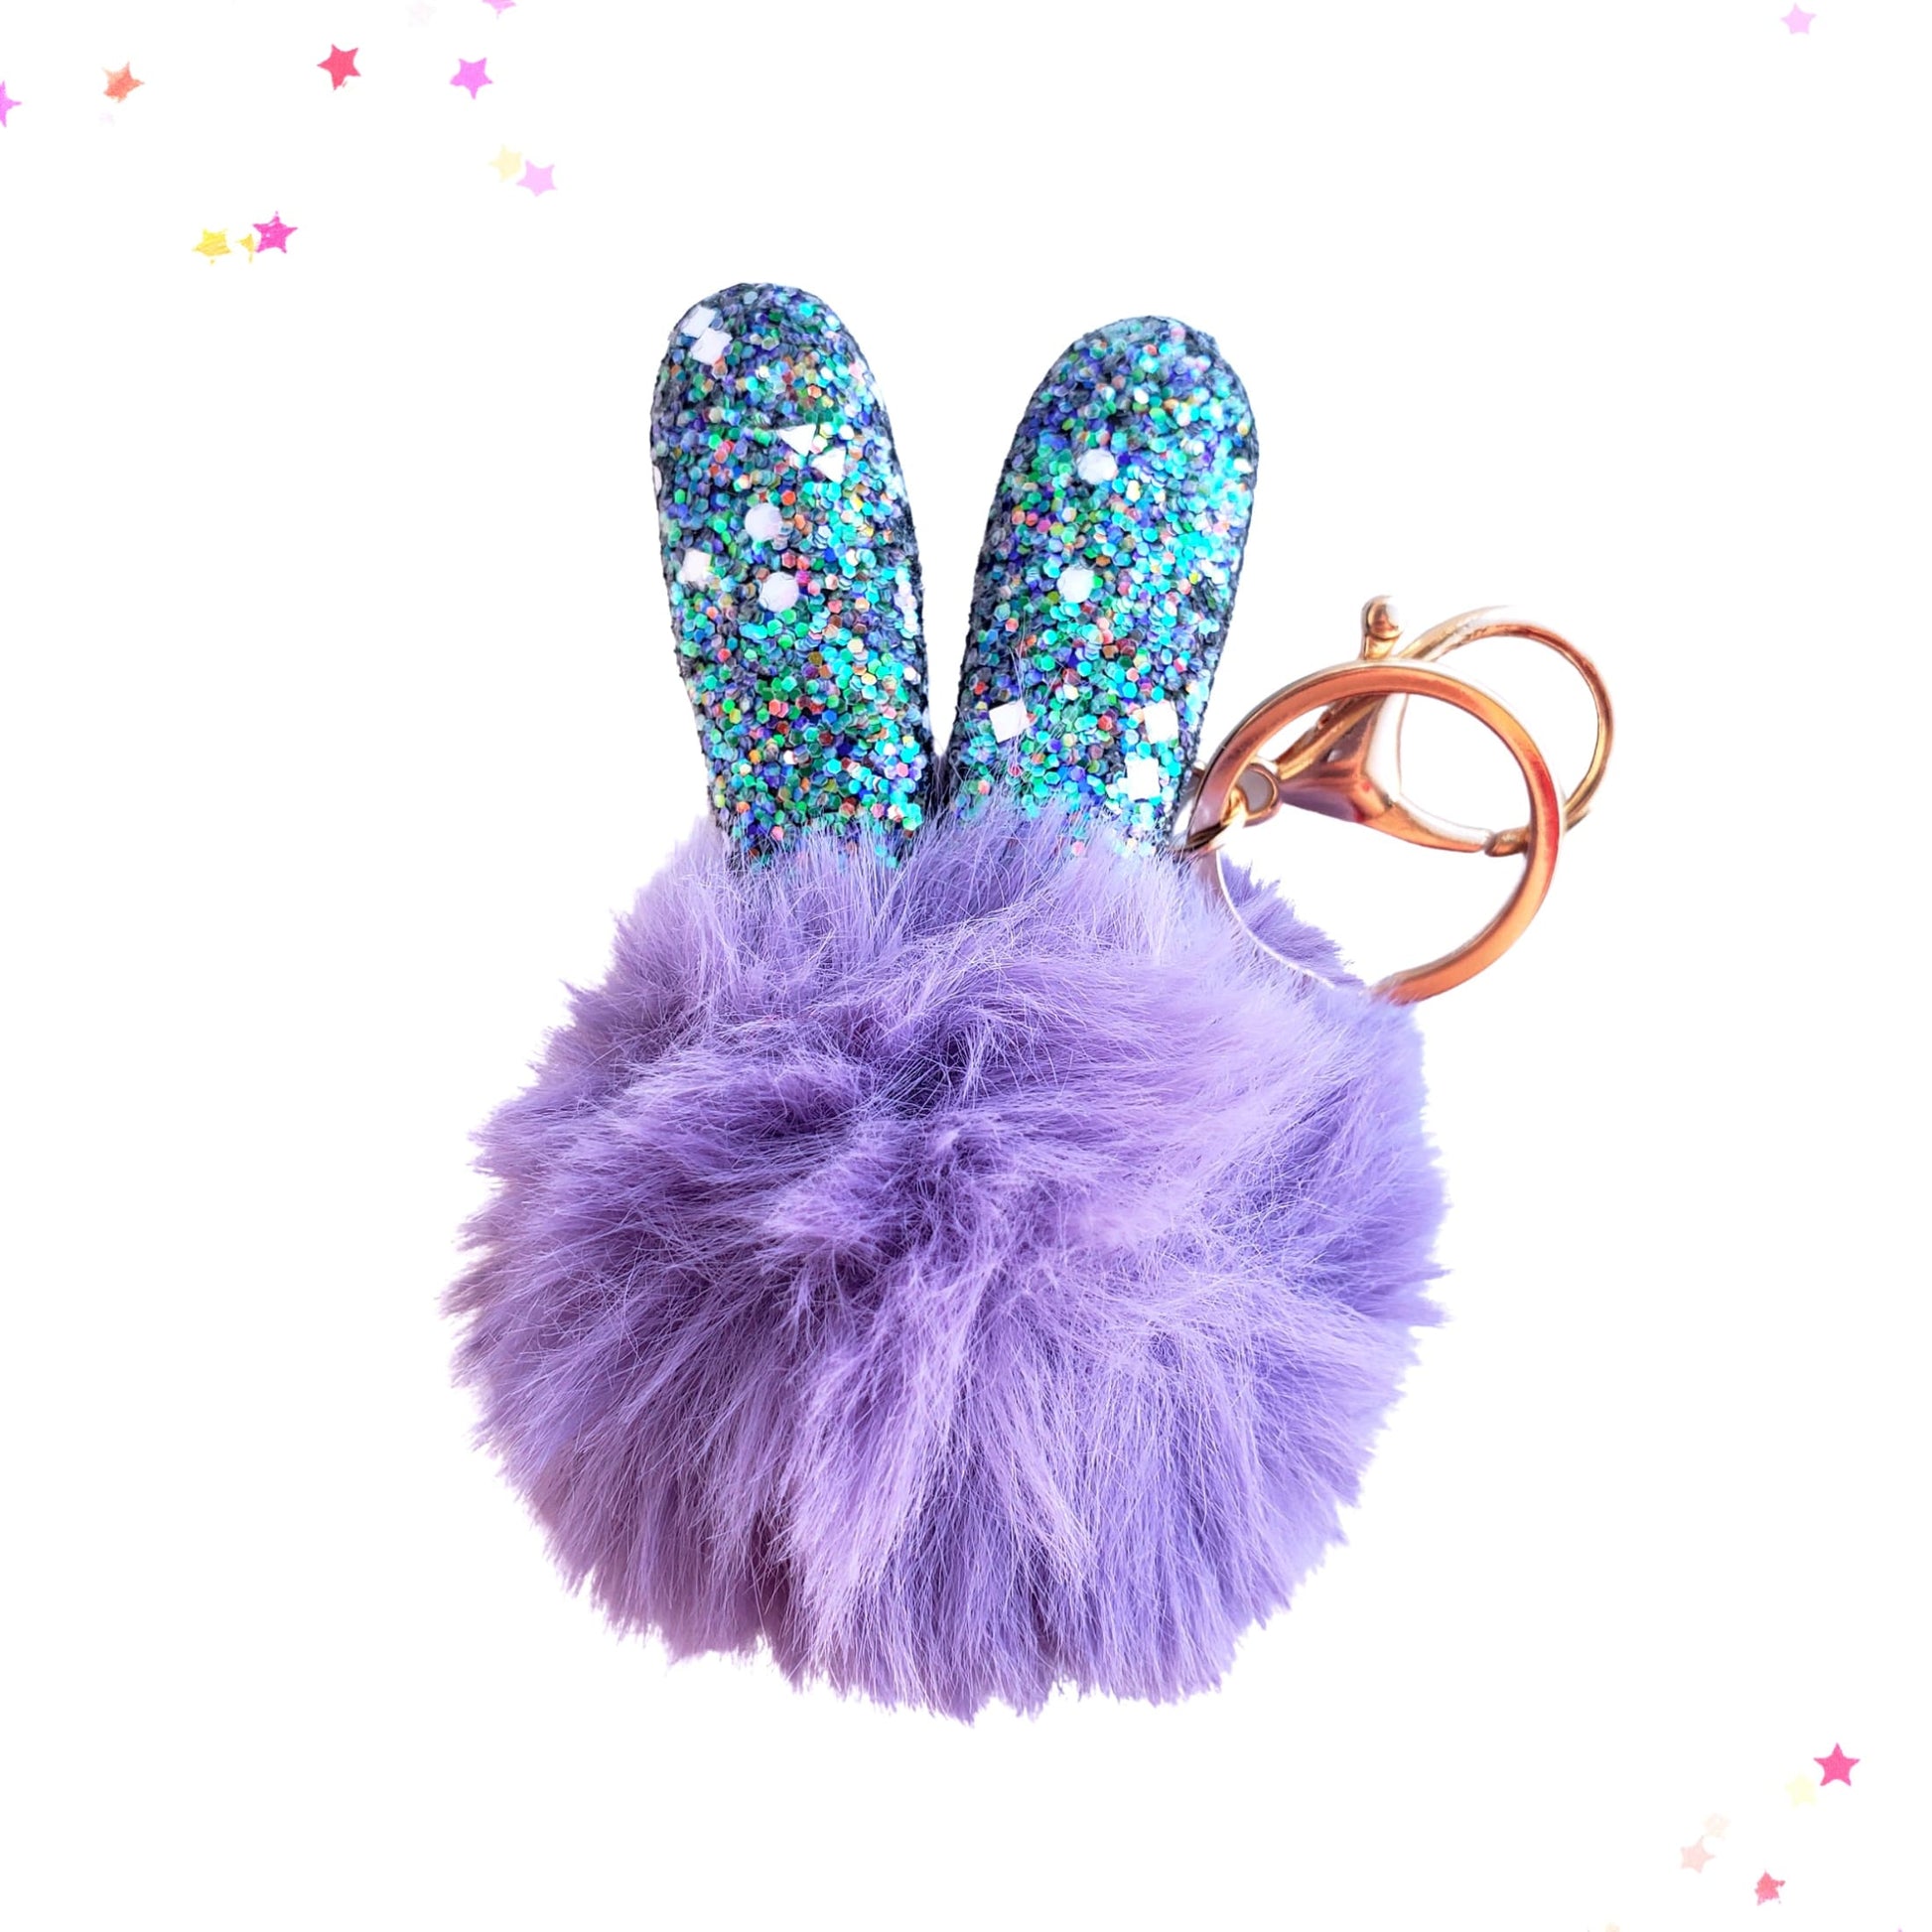 Sparkly Bunny Ear Keychain Bag Charm from Confetti Kitty, Only 4.99